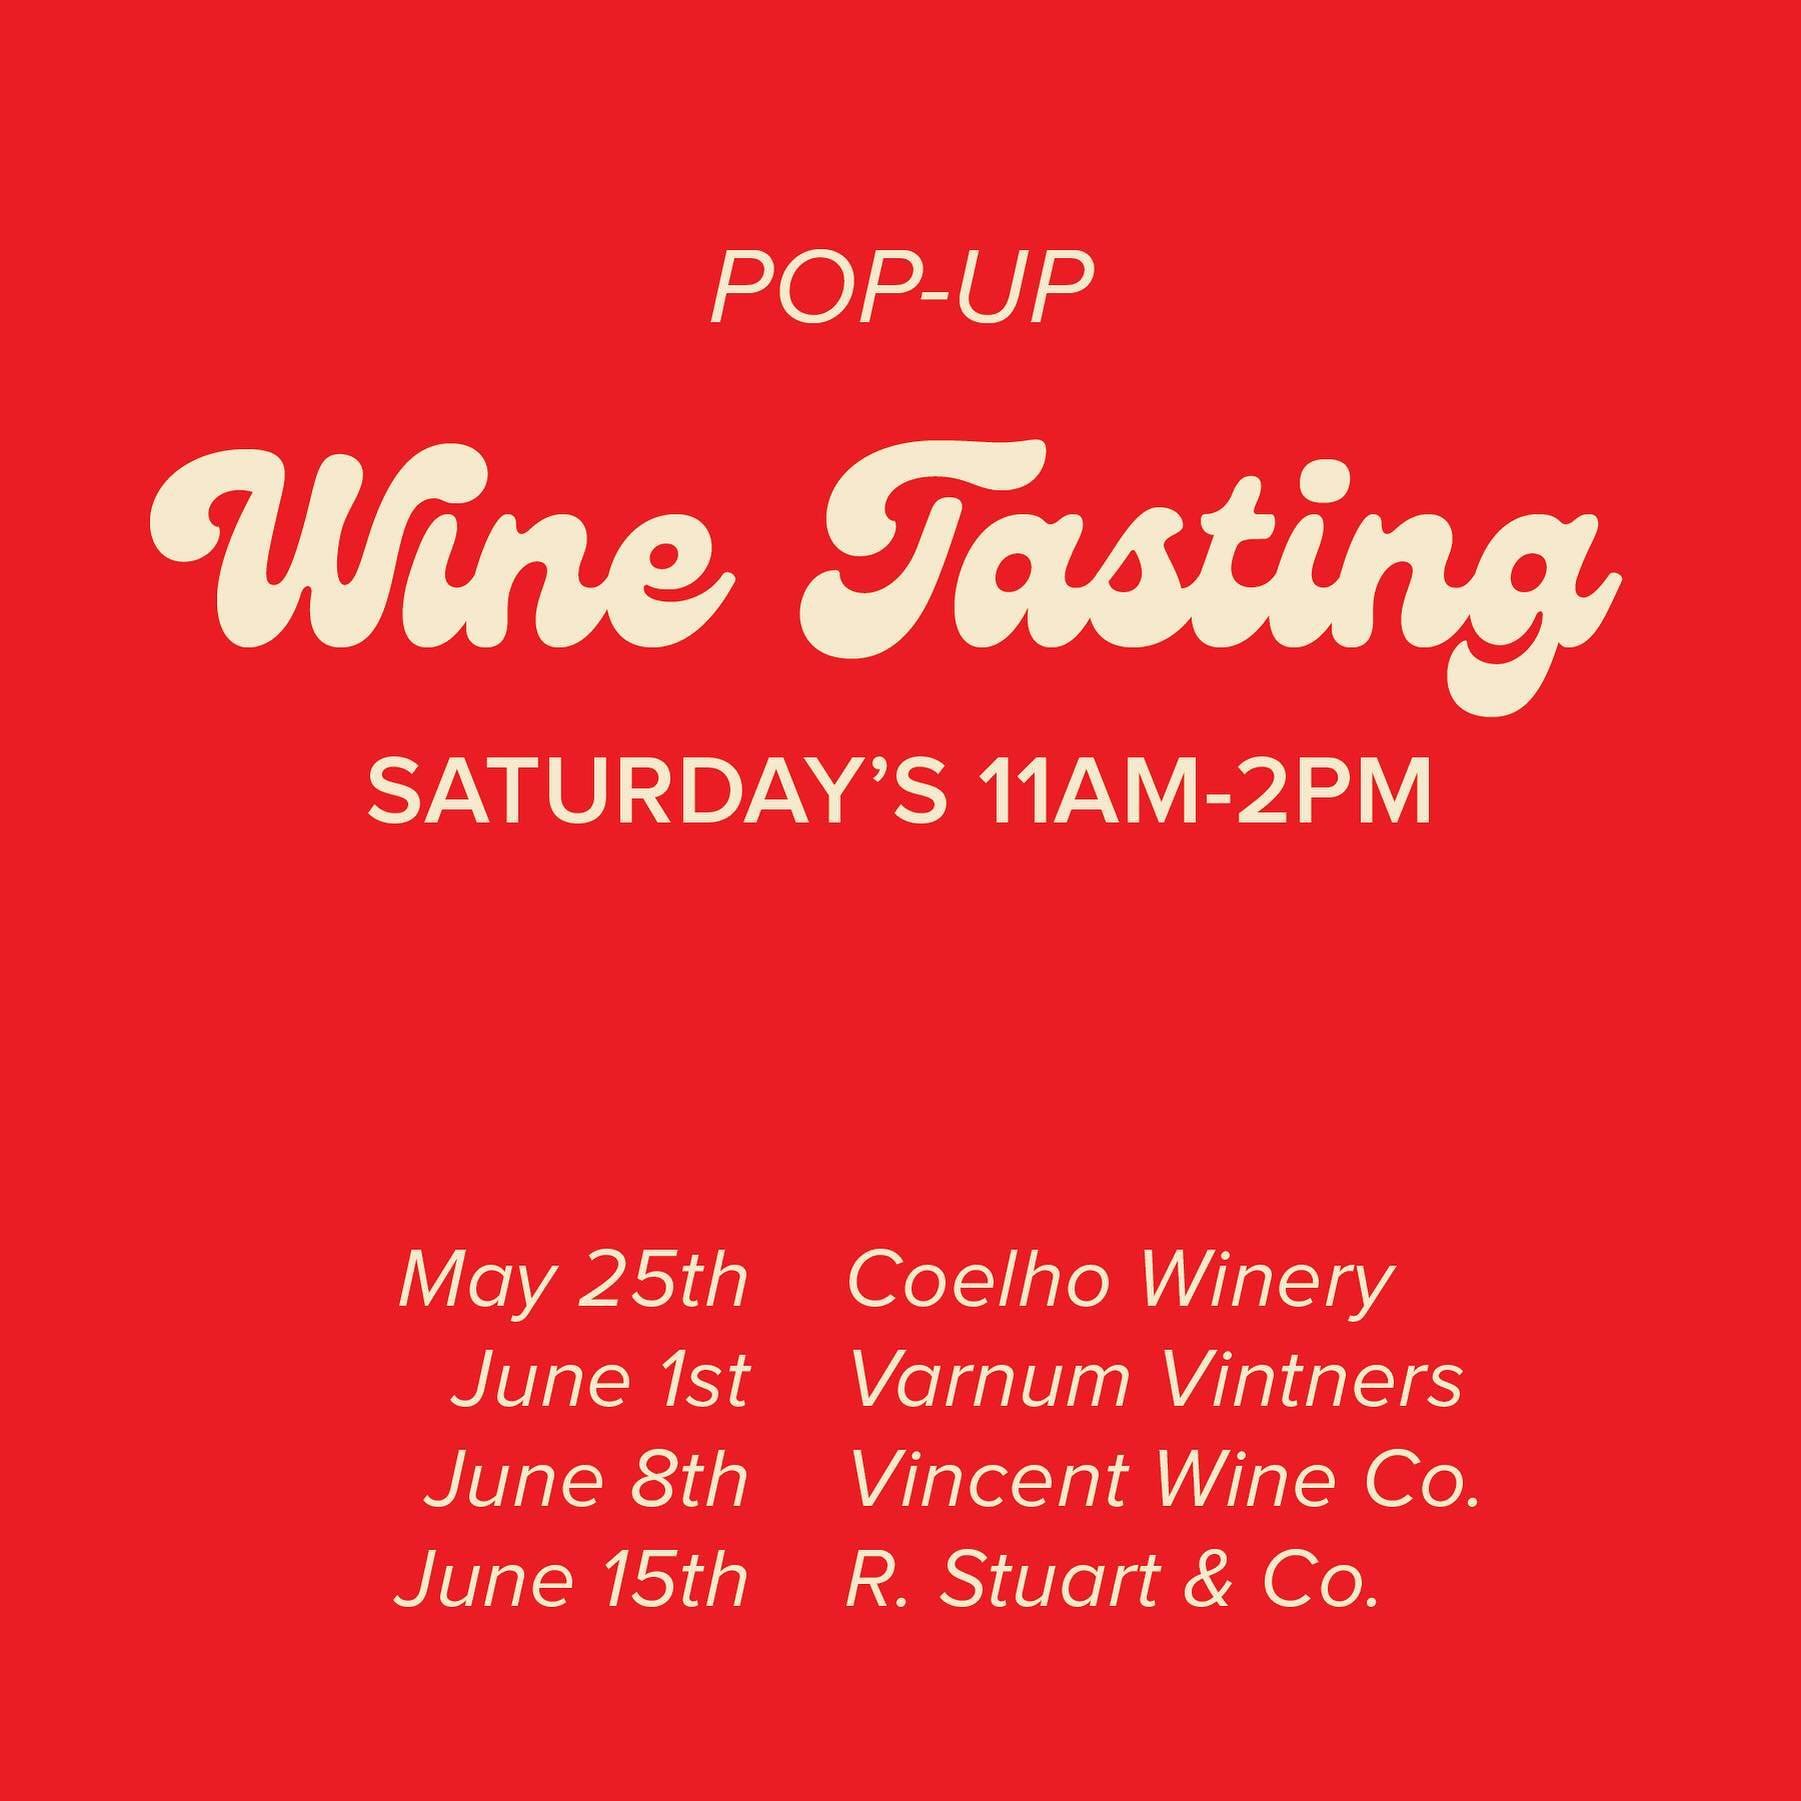 Next month we will be begin wine and beer sales at our Marketplace! We&rsquo;ll be kicking off our wine tasting pop-up series with @coelho_winery on Saturday, May 25 from 11am-2pm. Save the date and come by on Saturdays to meet our local wineries &am